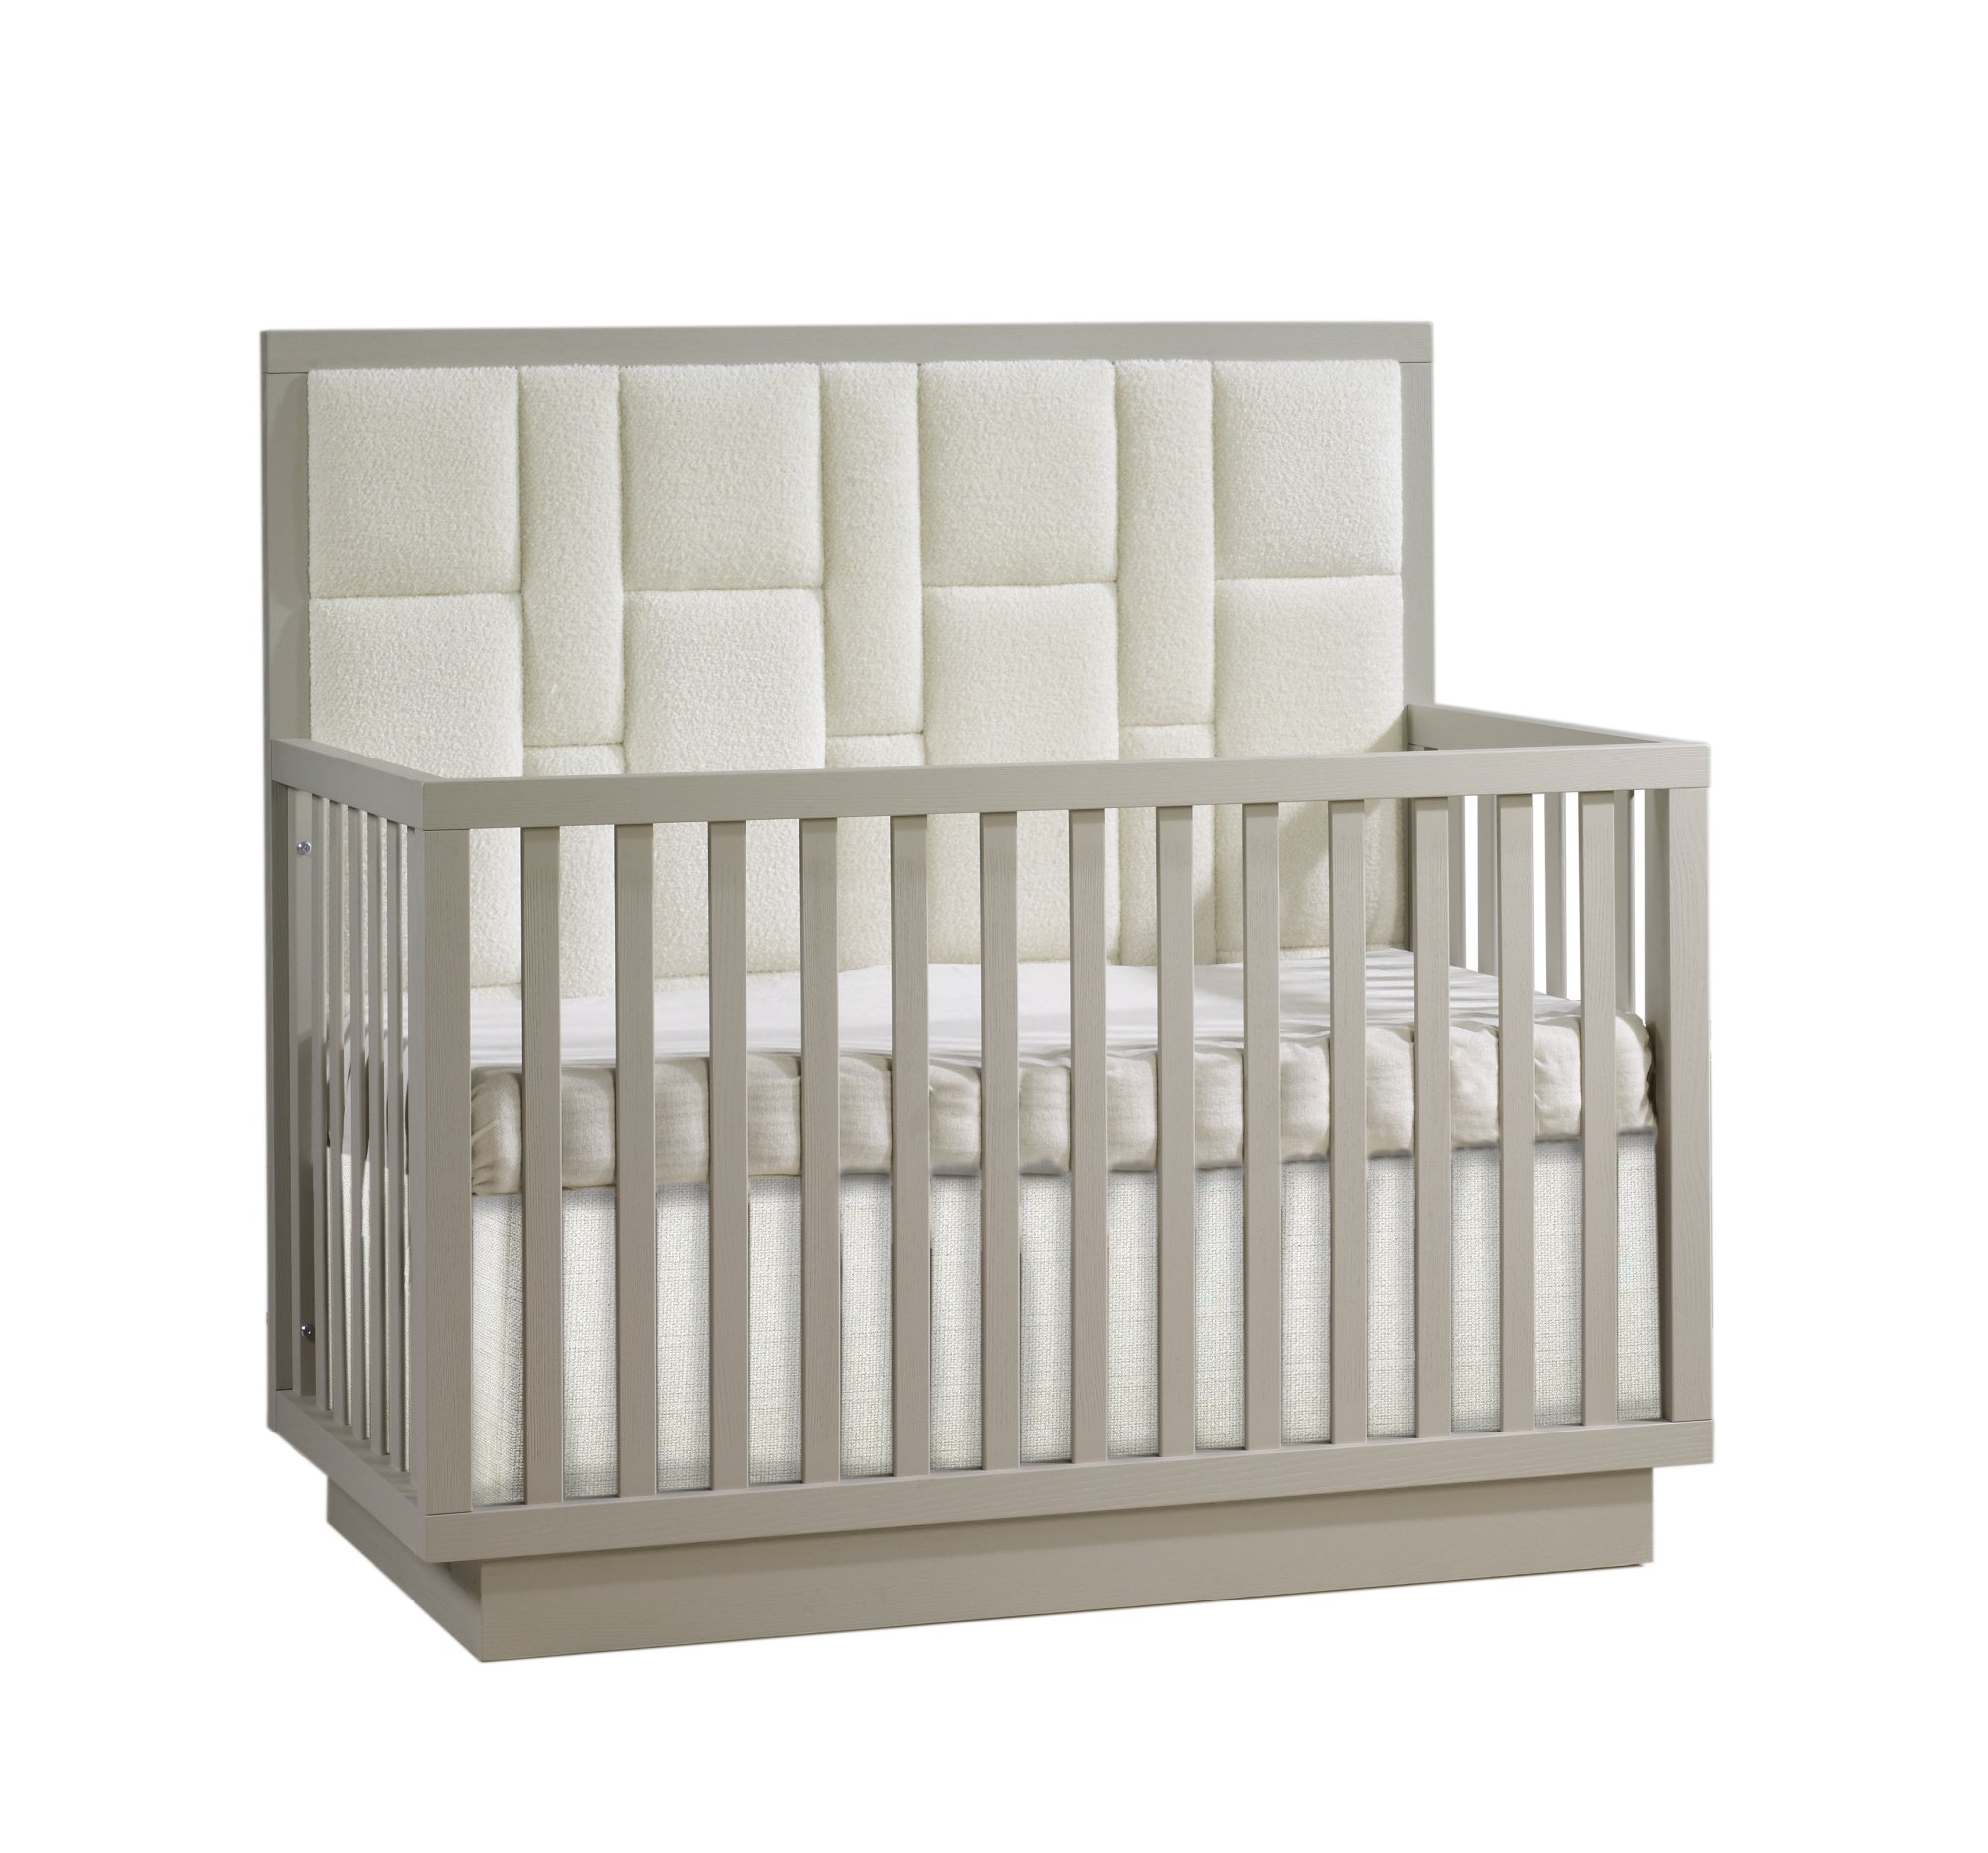 Como 5-in-1 Convertible Crib with Geometric Upholstered Headboard panel in Dove